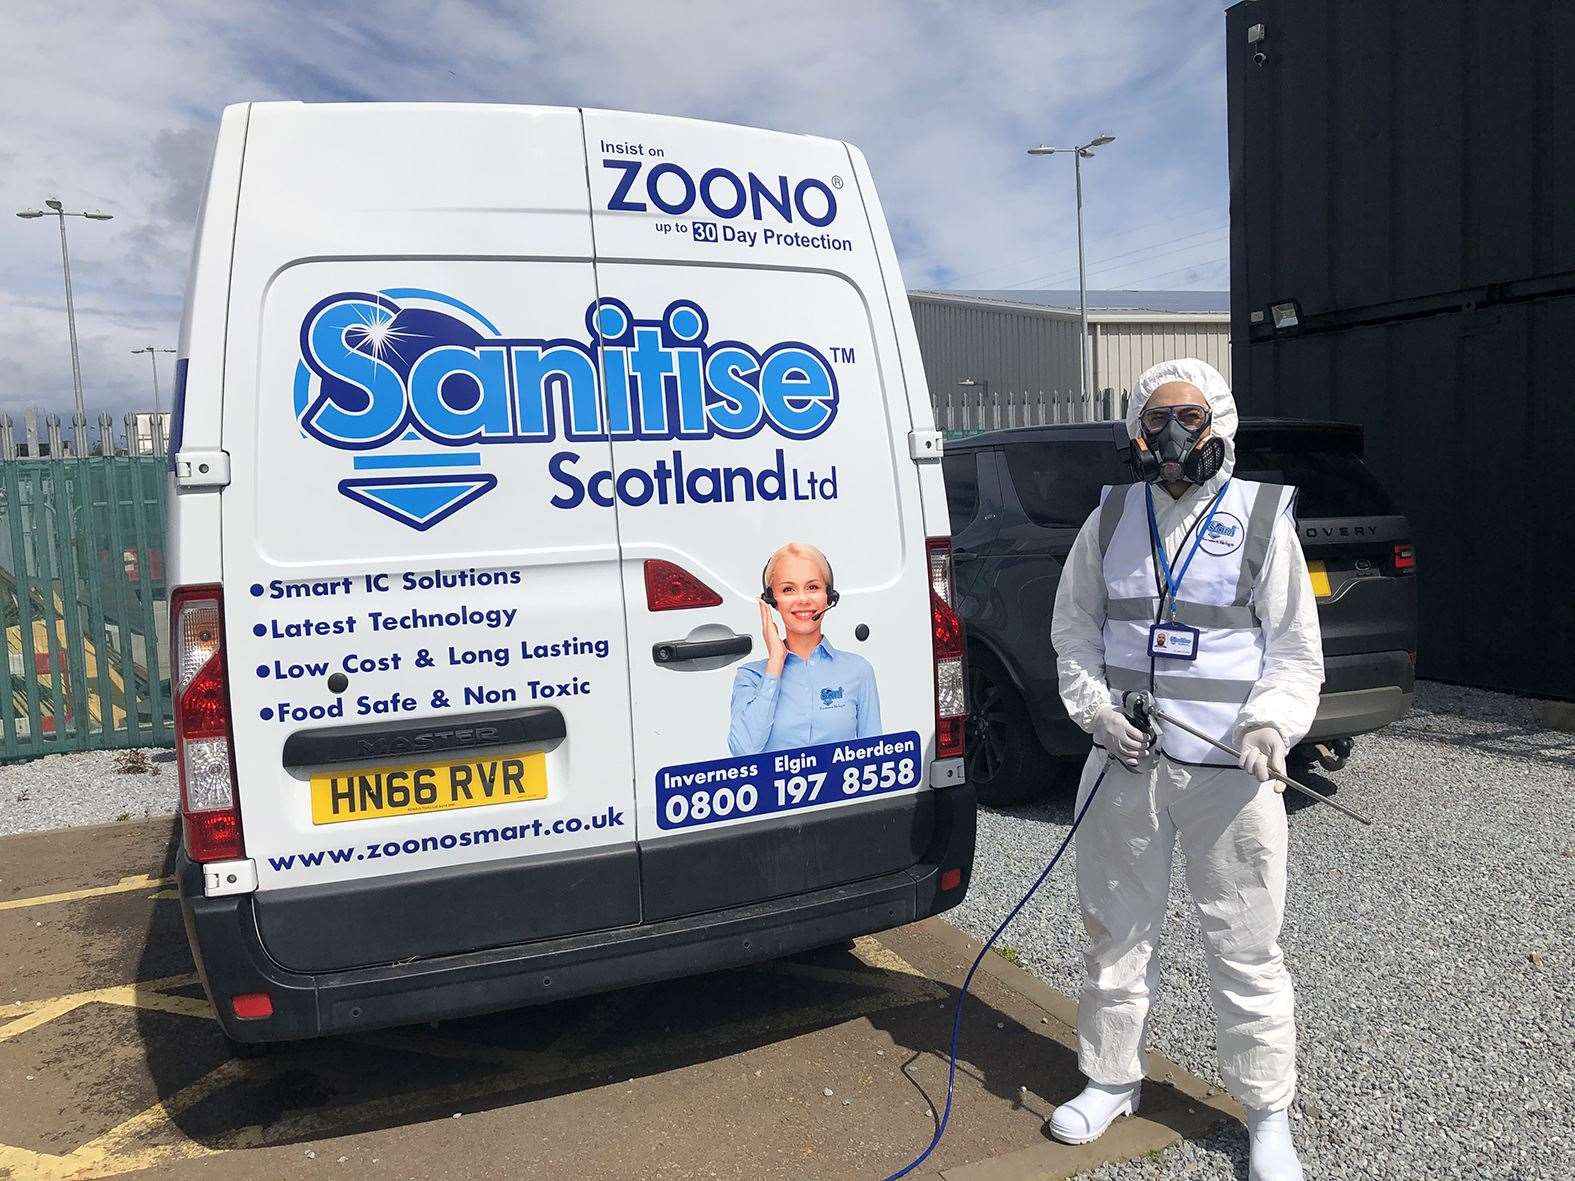 Sanitise Scotland has launched with two vans in the road and expansions plans could increase this to 10 in the near future.